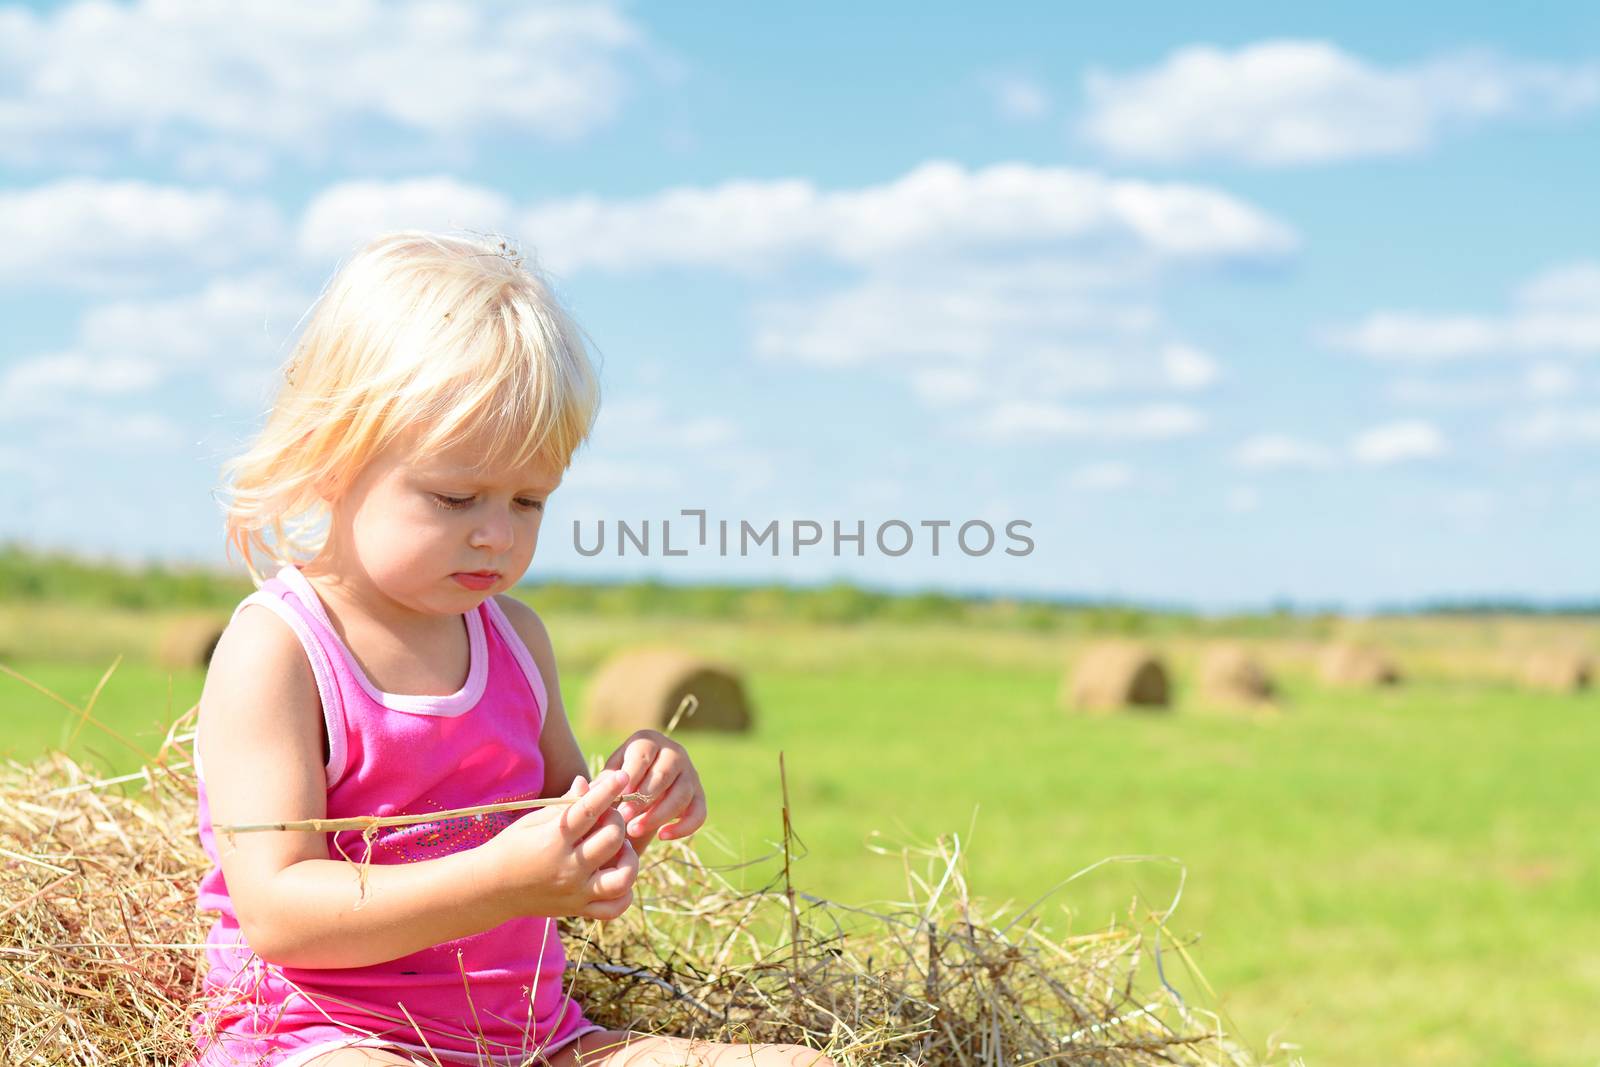 Rural Girl On The Straw After Harvest Field With Straw Bales